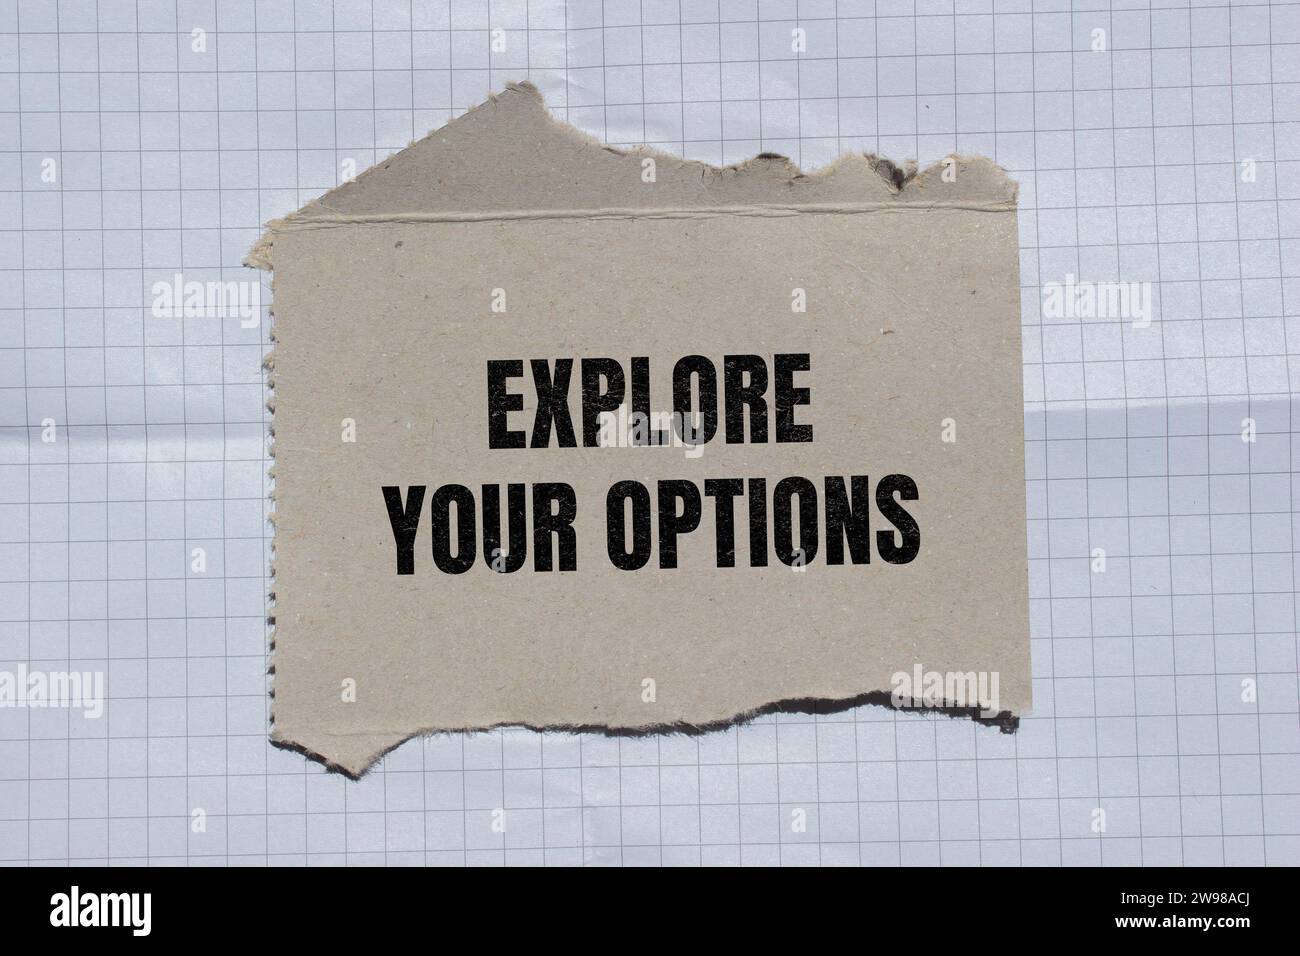 Explore your option lettering on ripped paper. Business concept photo. Stock Photo